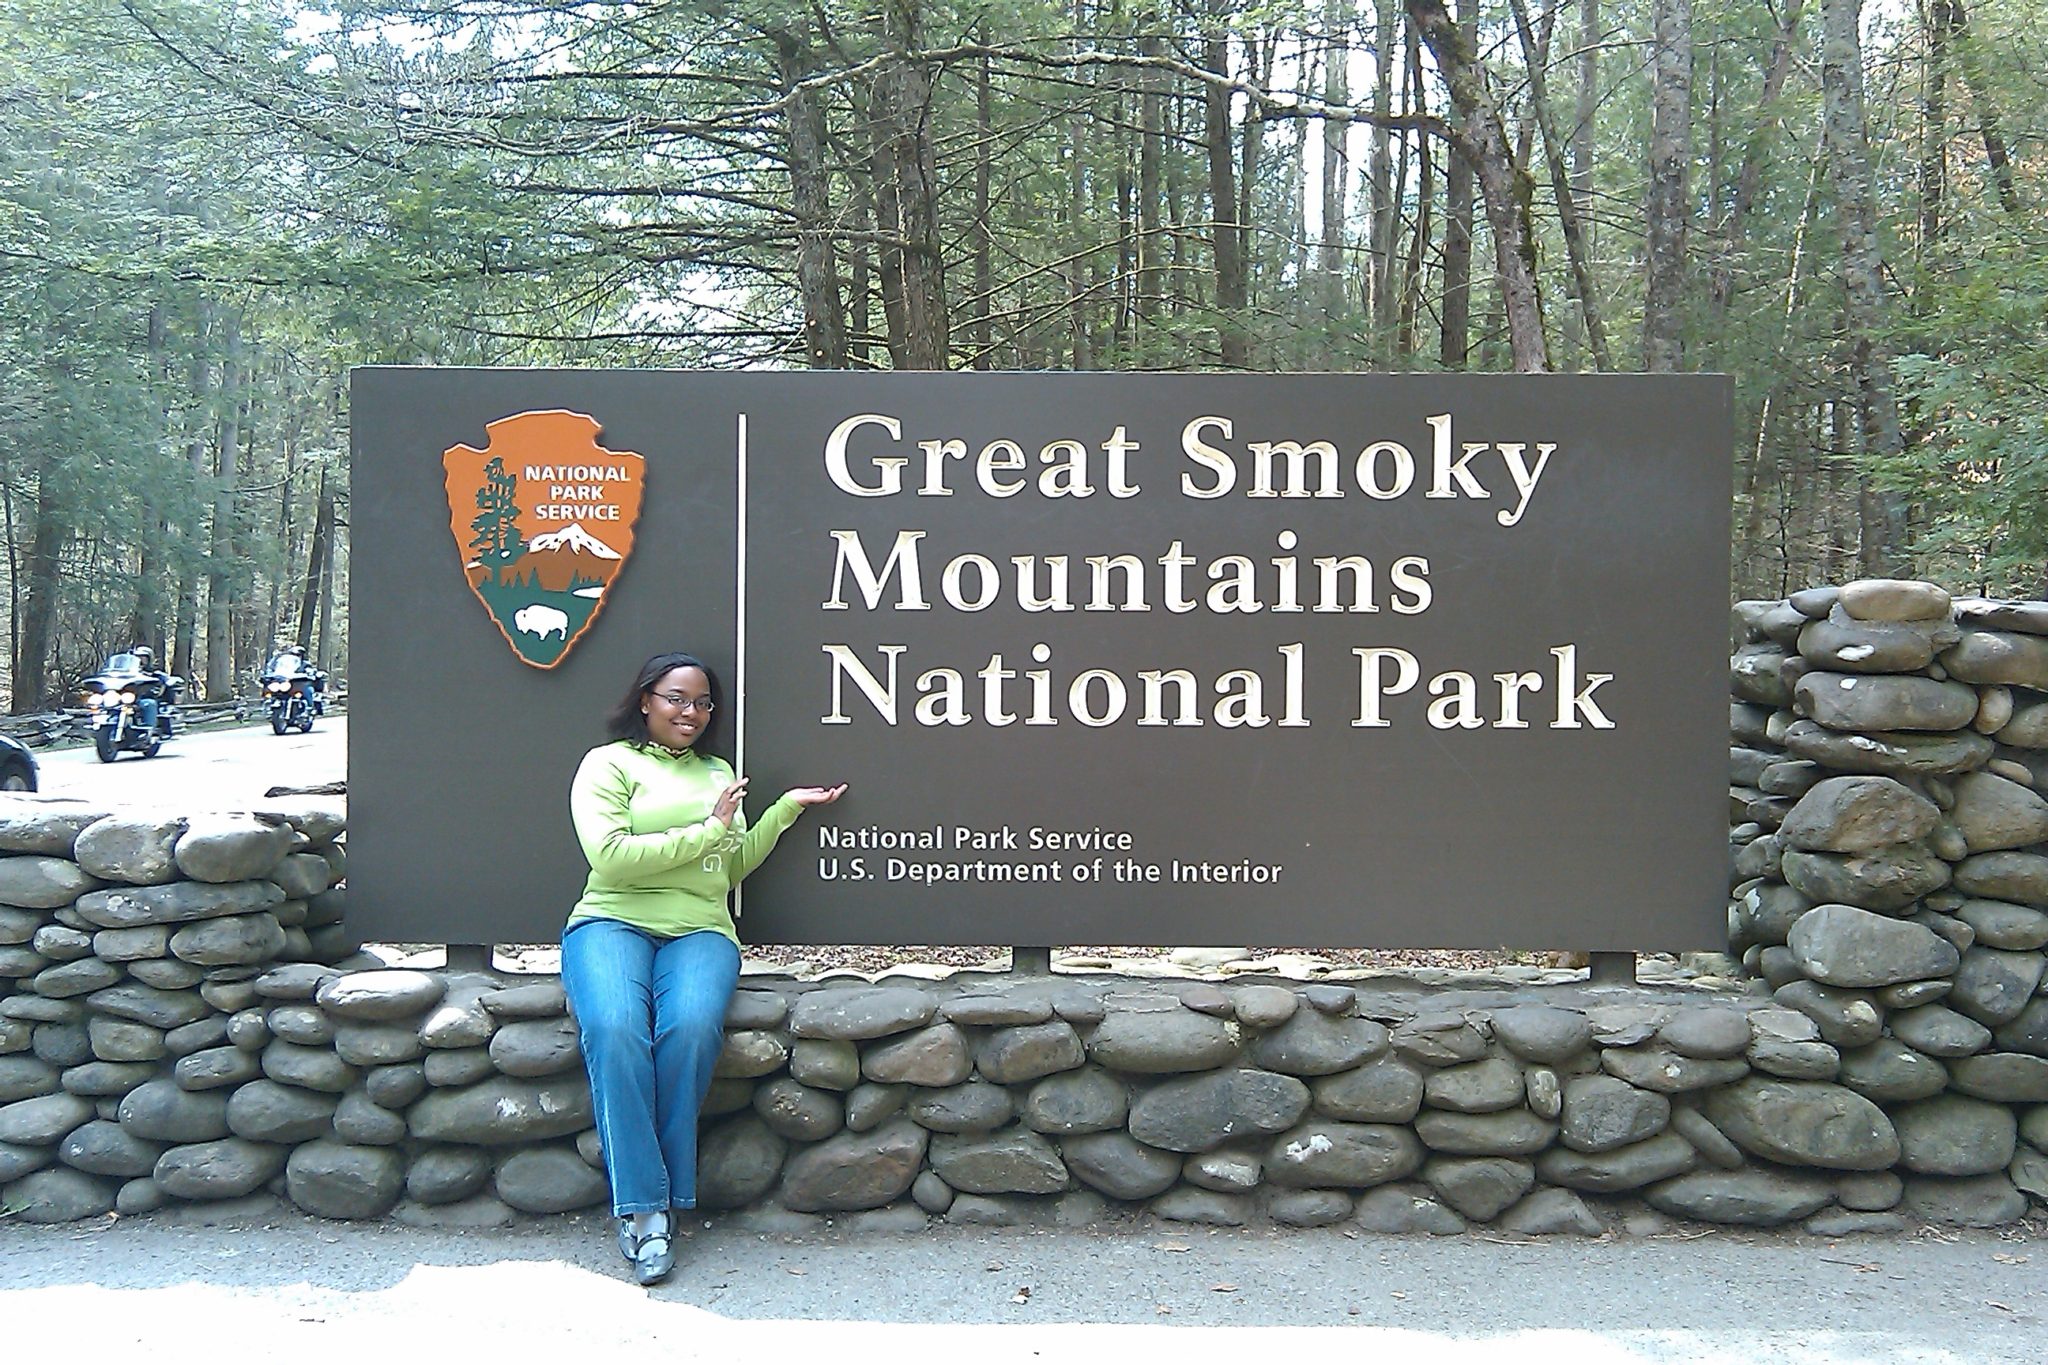 Great Smoky Mountains National Park at the Sign